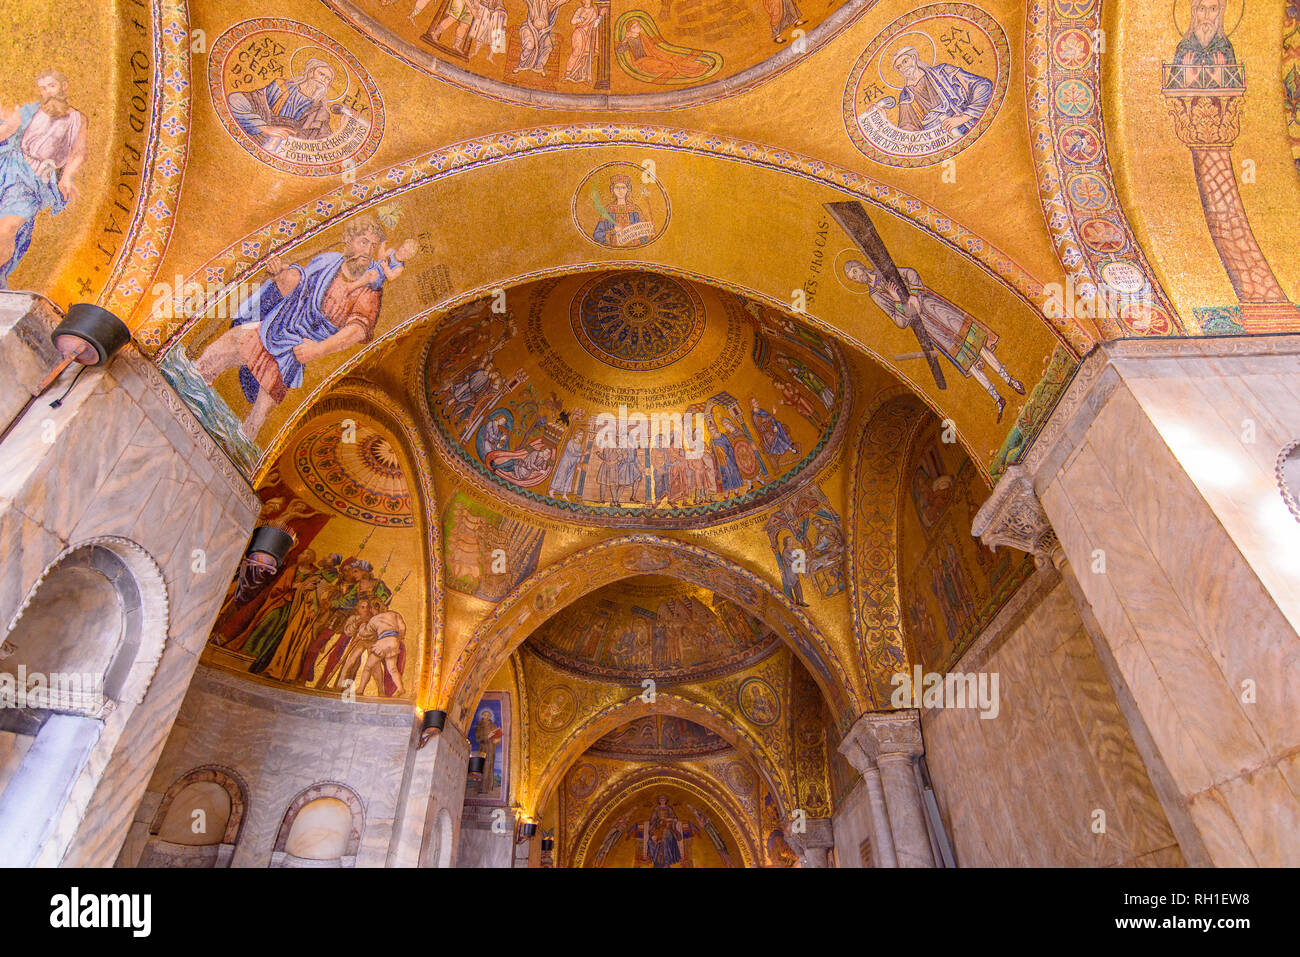 The mosaic decoration art of the interior of St Mark's Basilica, the cathedral church of Venice, Italy Stock Photo